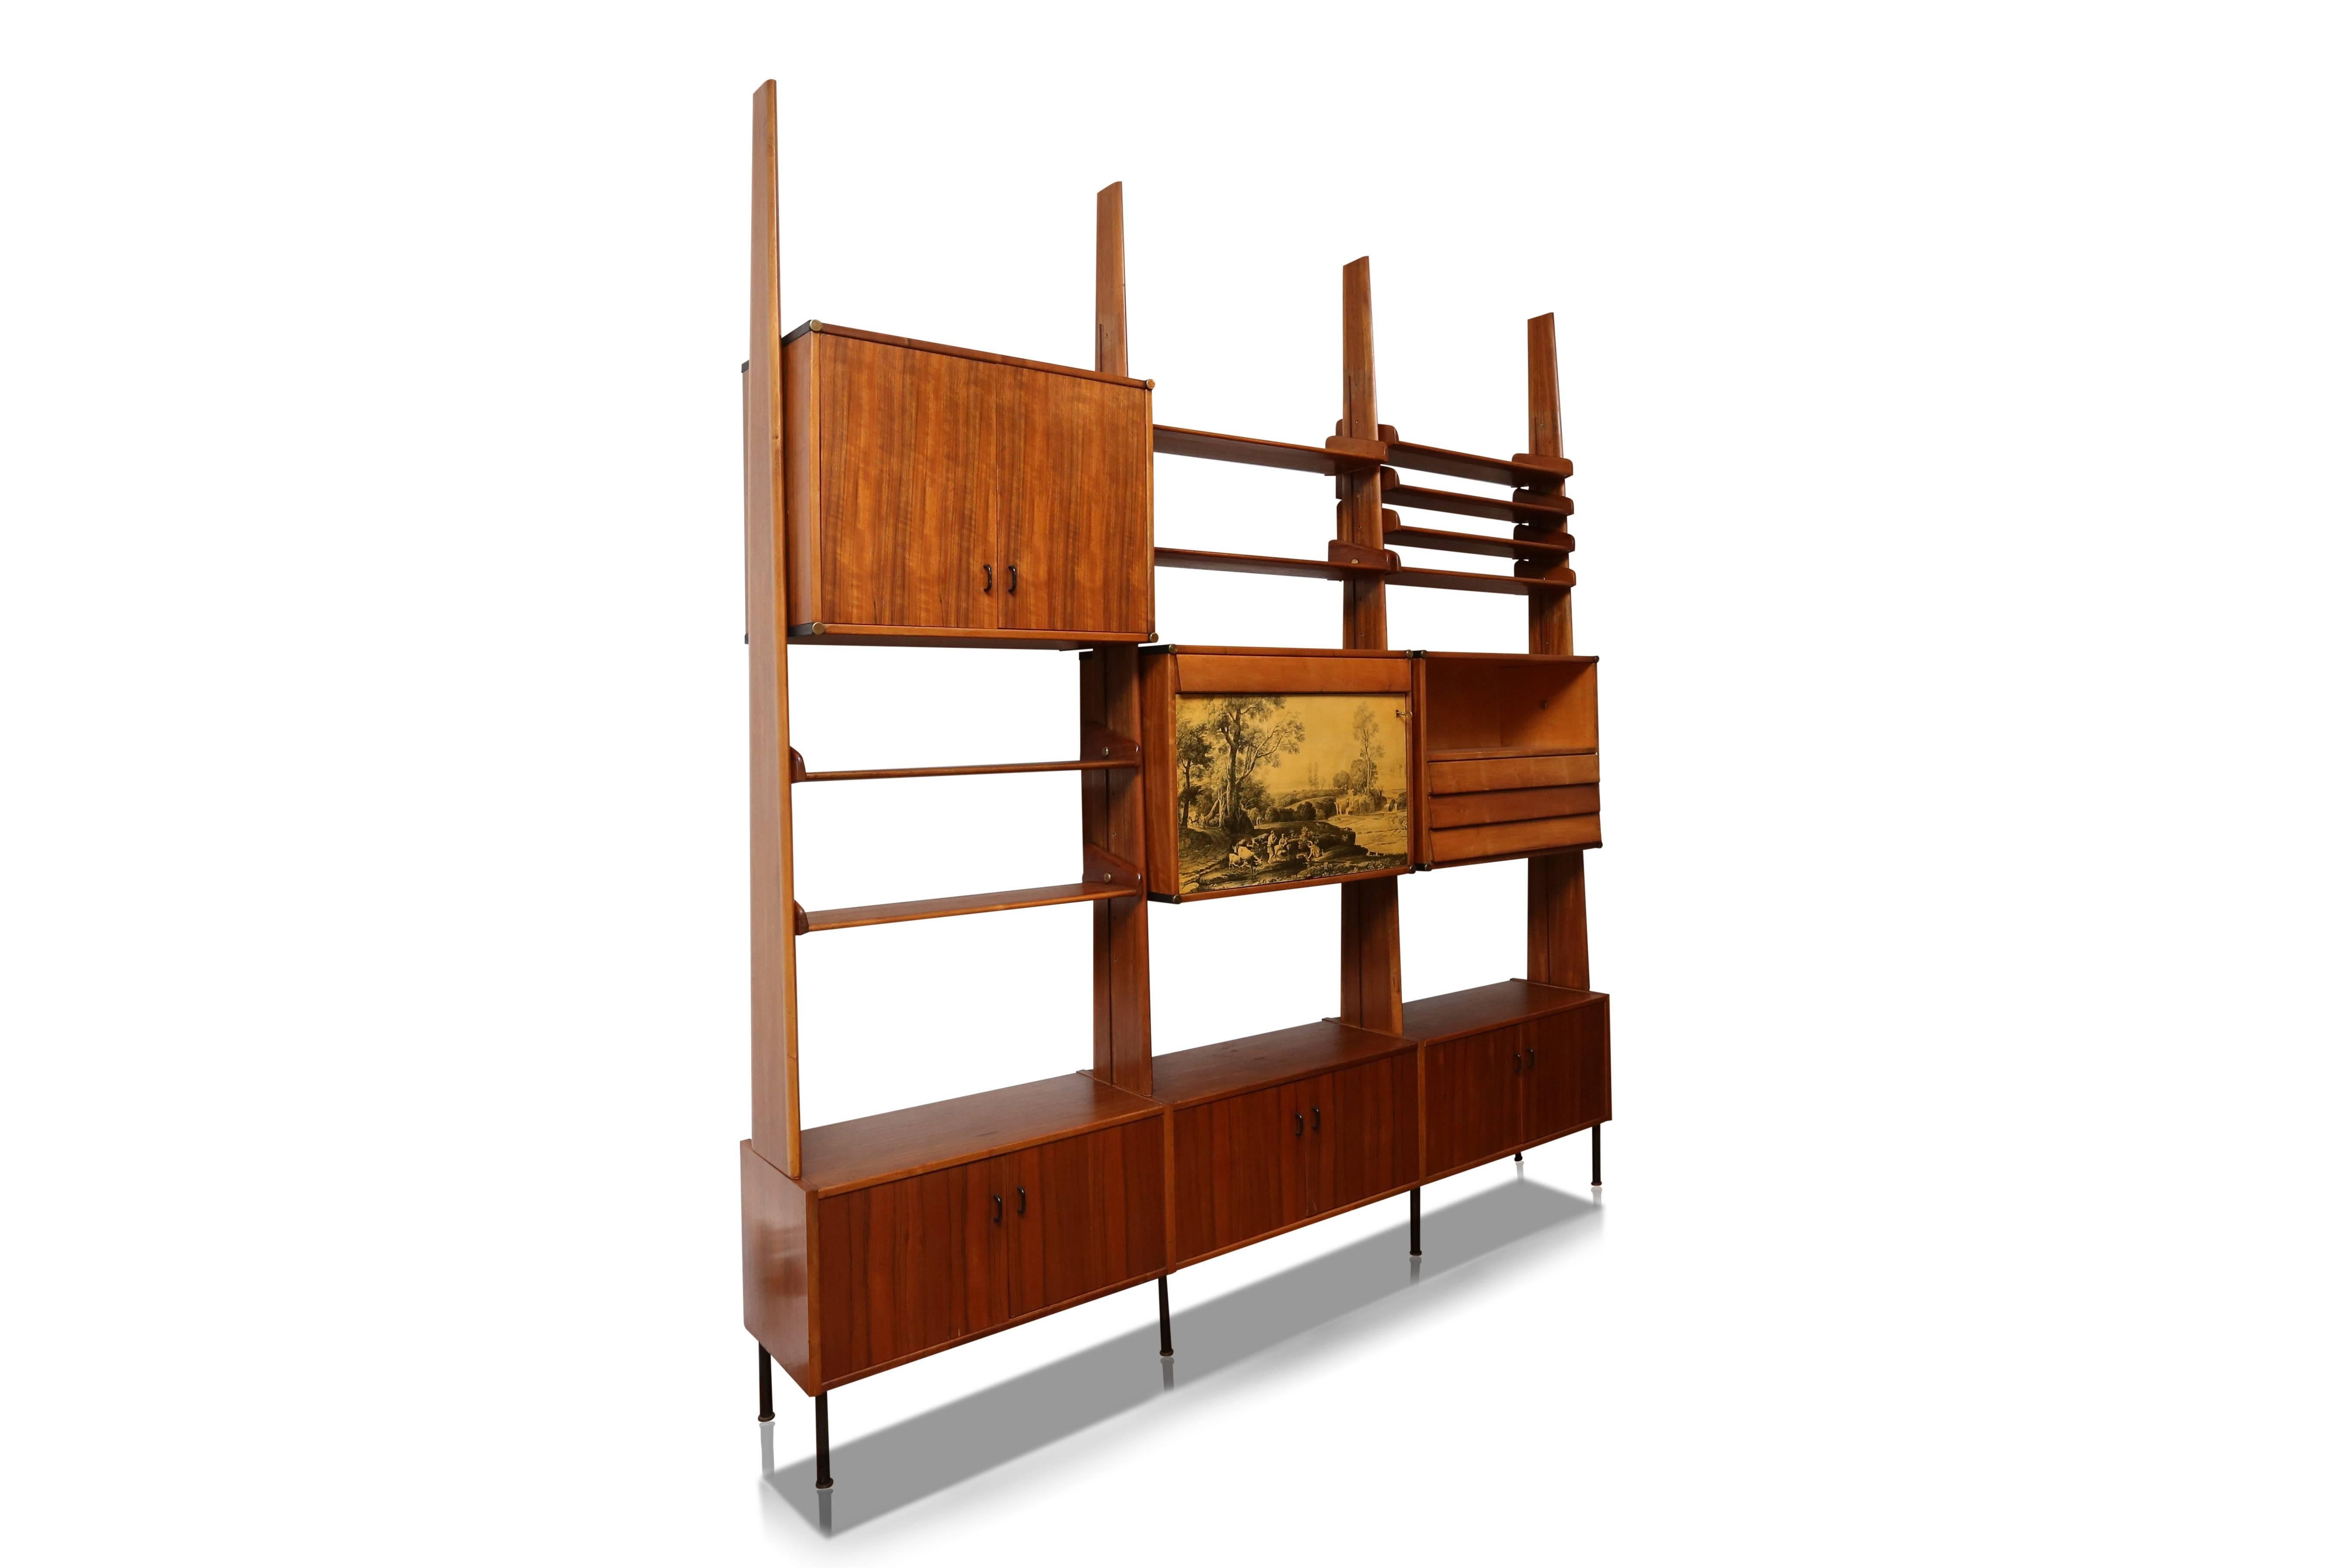 Italian wall console with shelving system.
Attributed to Franco Albini,
Italy, 1950s.
Walnut, brass.
Measures: L 250 cm, H 277 cm, D 42 cm.
three more shelves included.